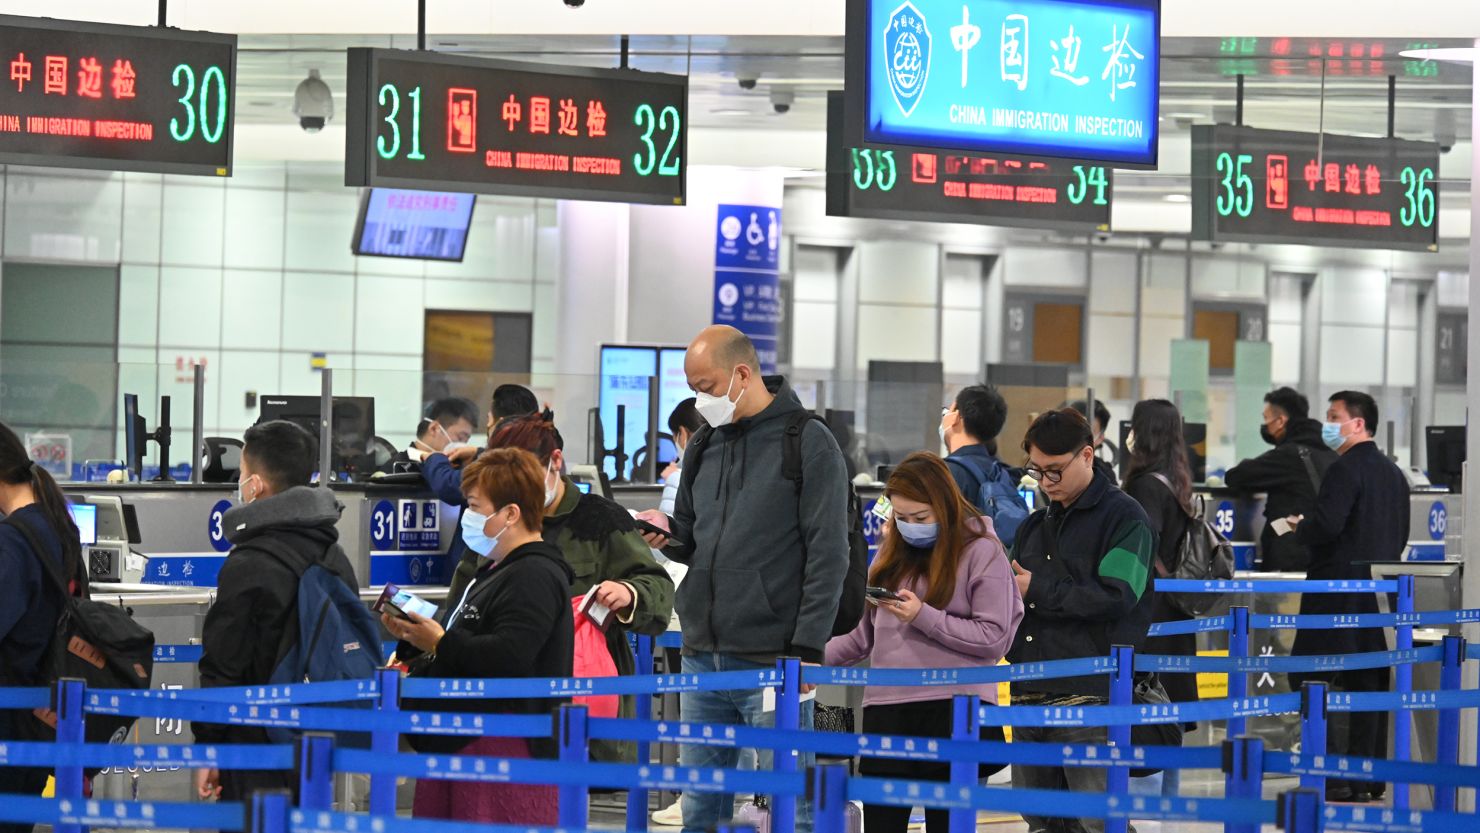 Travelers queue up to go through passport control at Shanghai Pudong International Airport on March 12, 2023 in Shanghai, China.